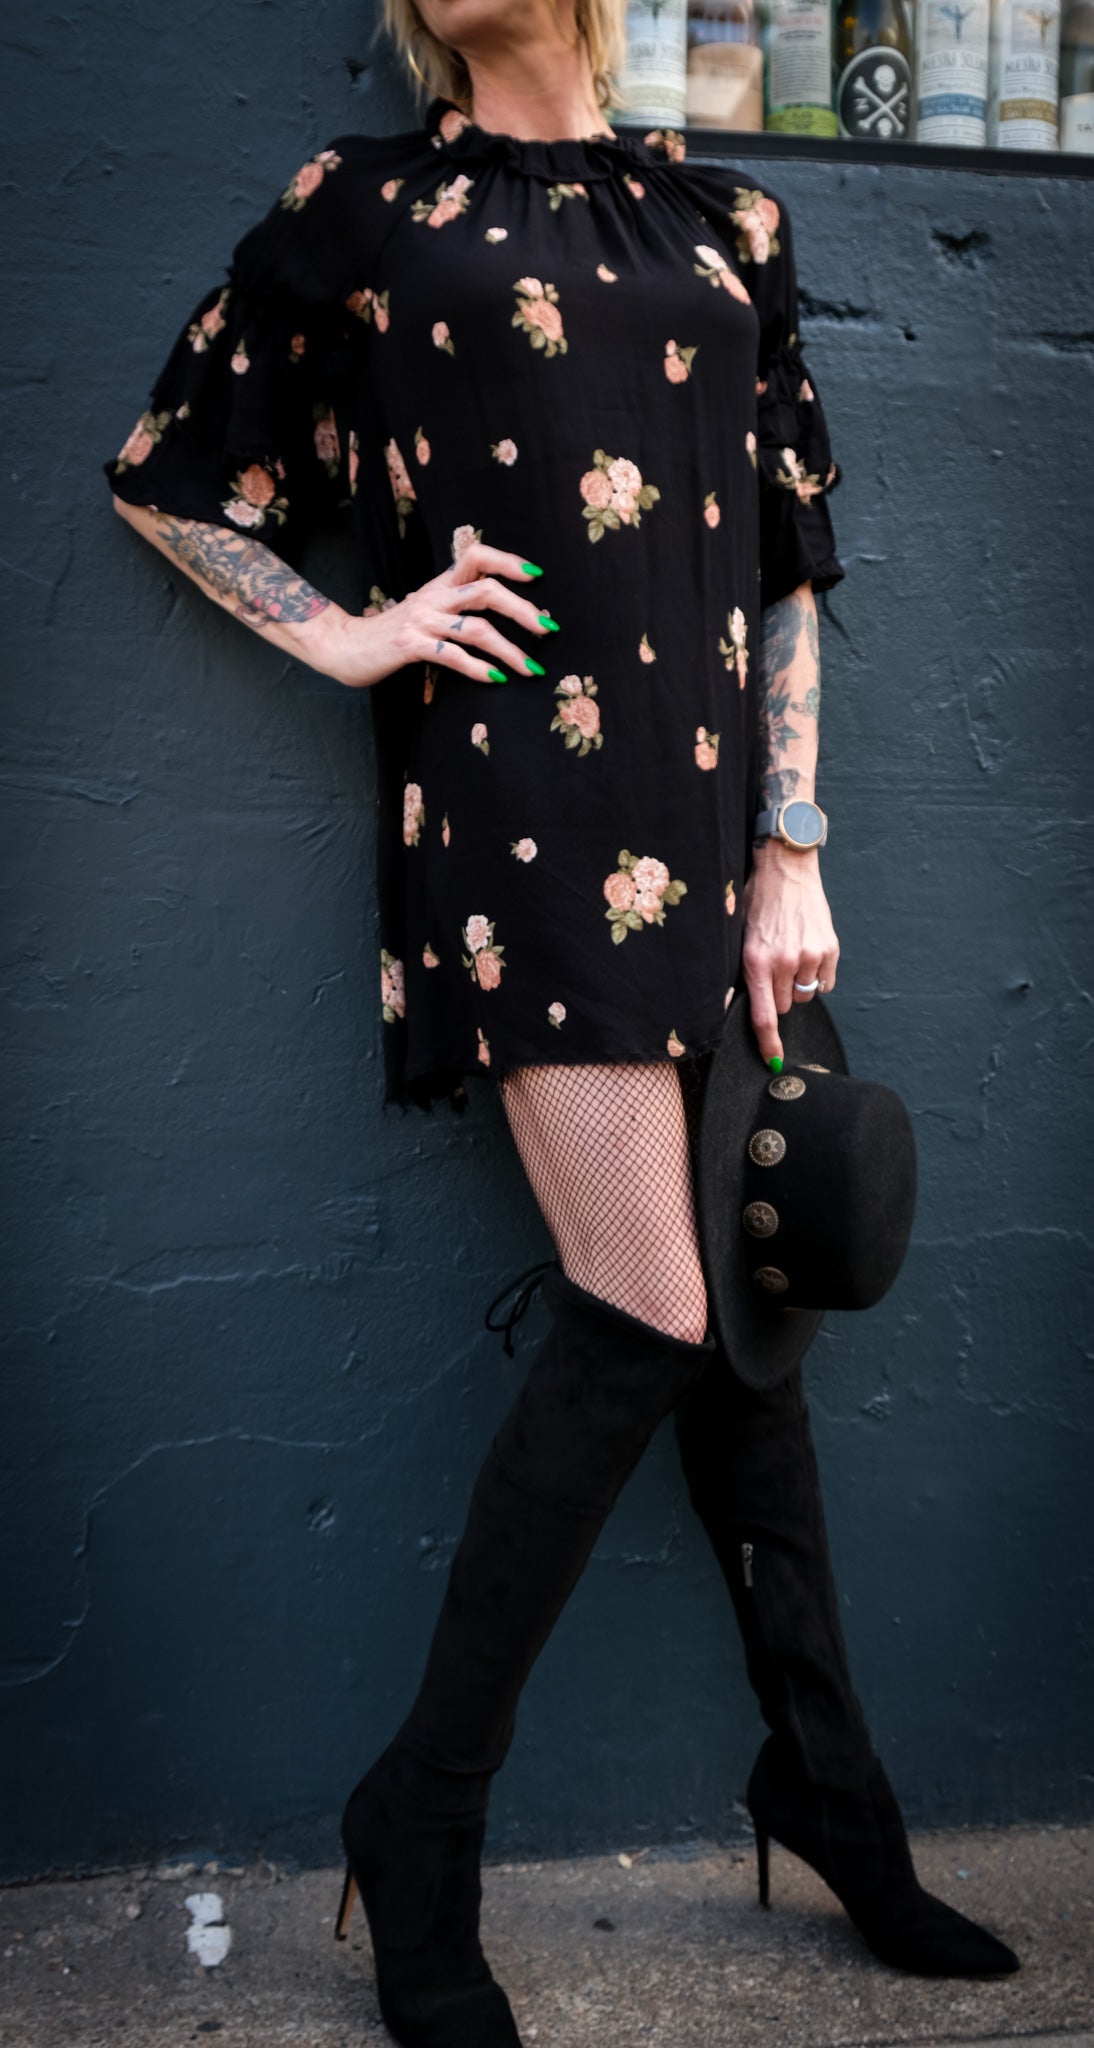 Model wearing a casual flowy black and floral dress matched with high boots